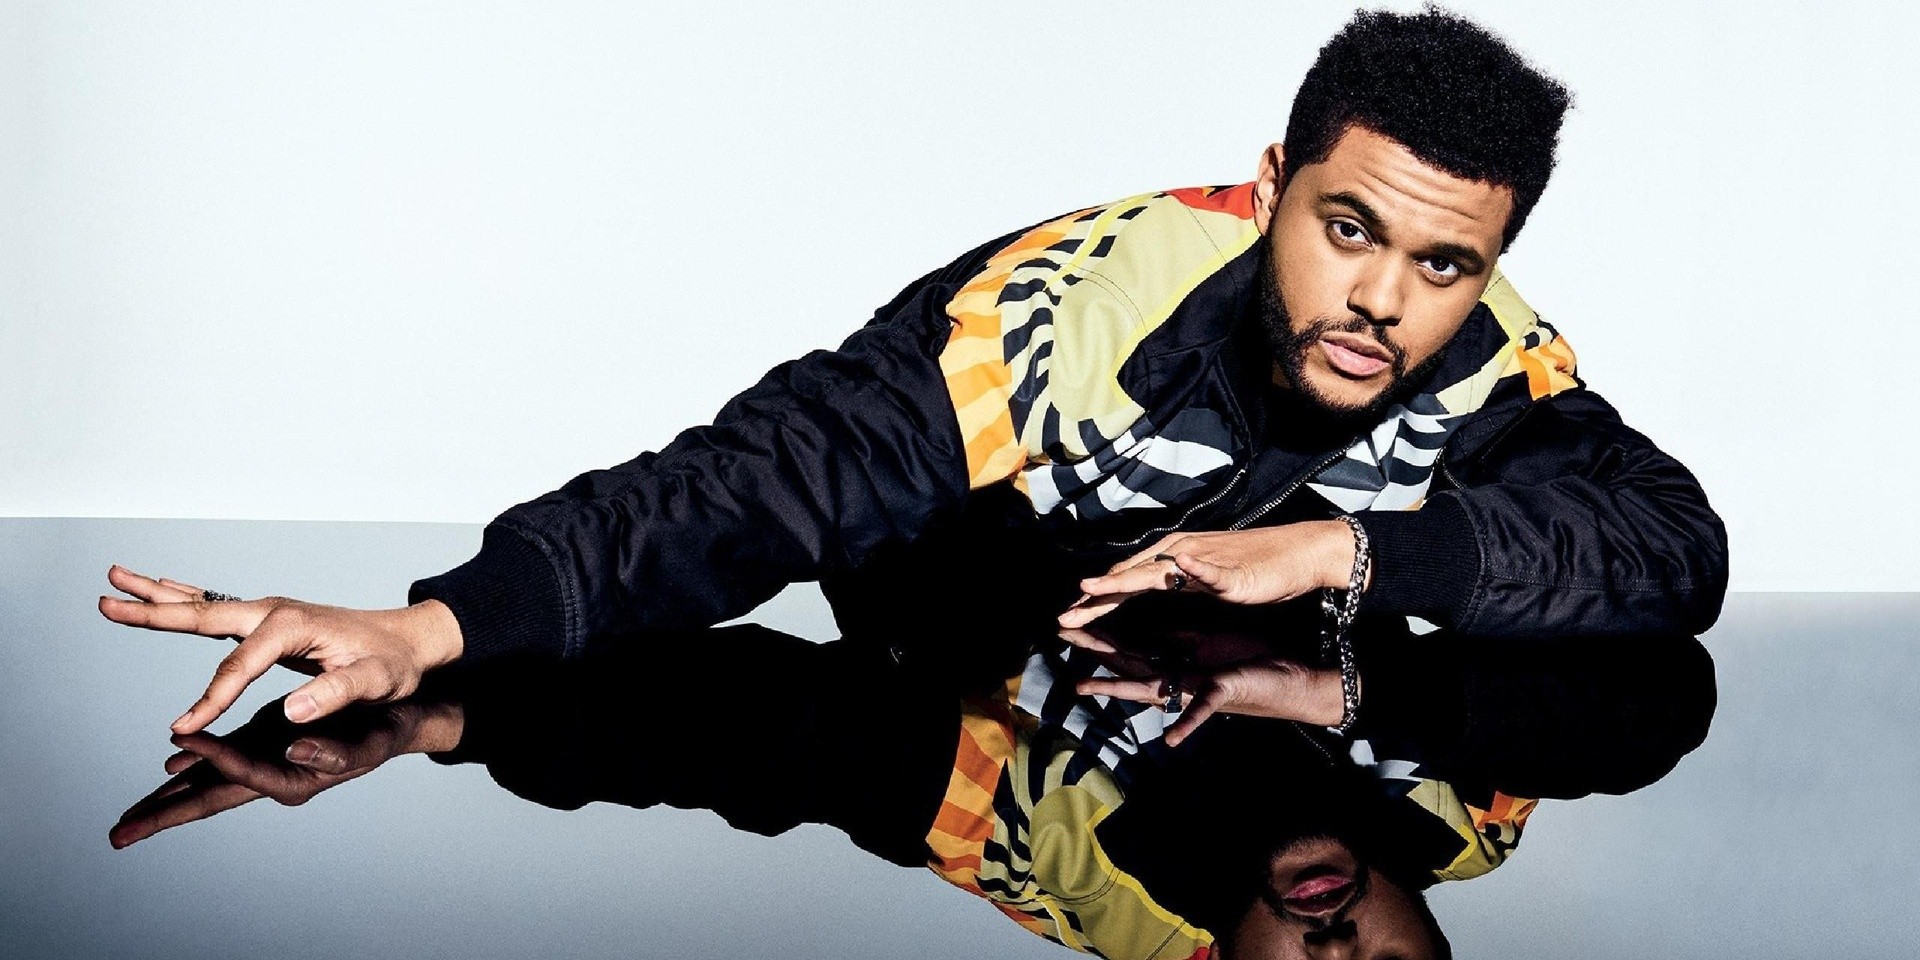 New ticket category for The Weeknd's show in Singapore announced